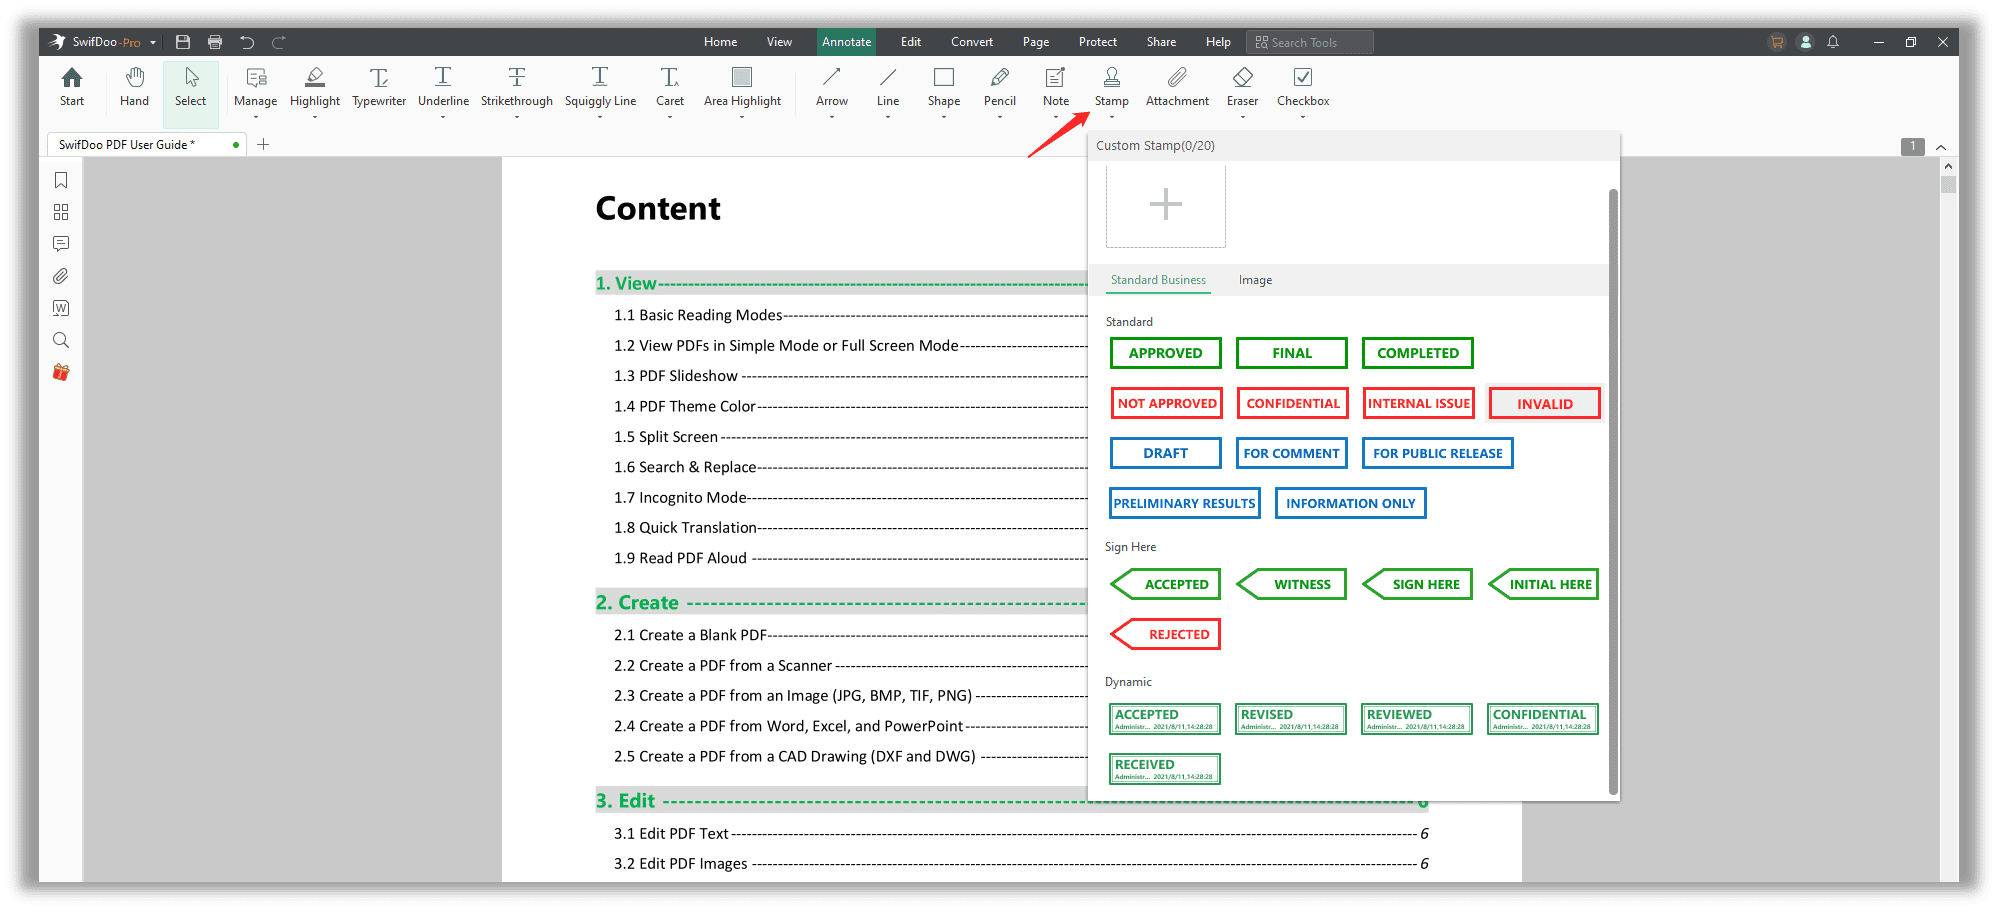 How to add stamps to a PDF in SwifDoo PDF